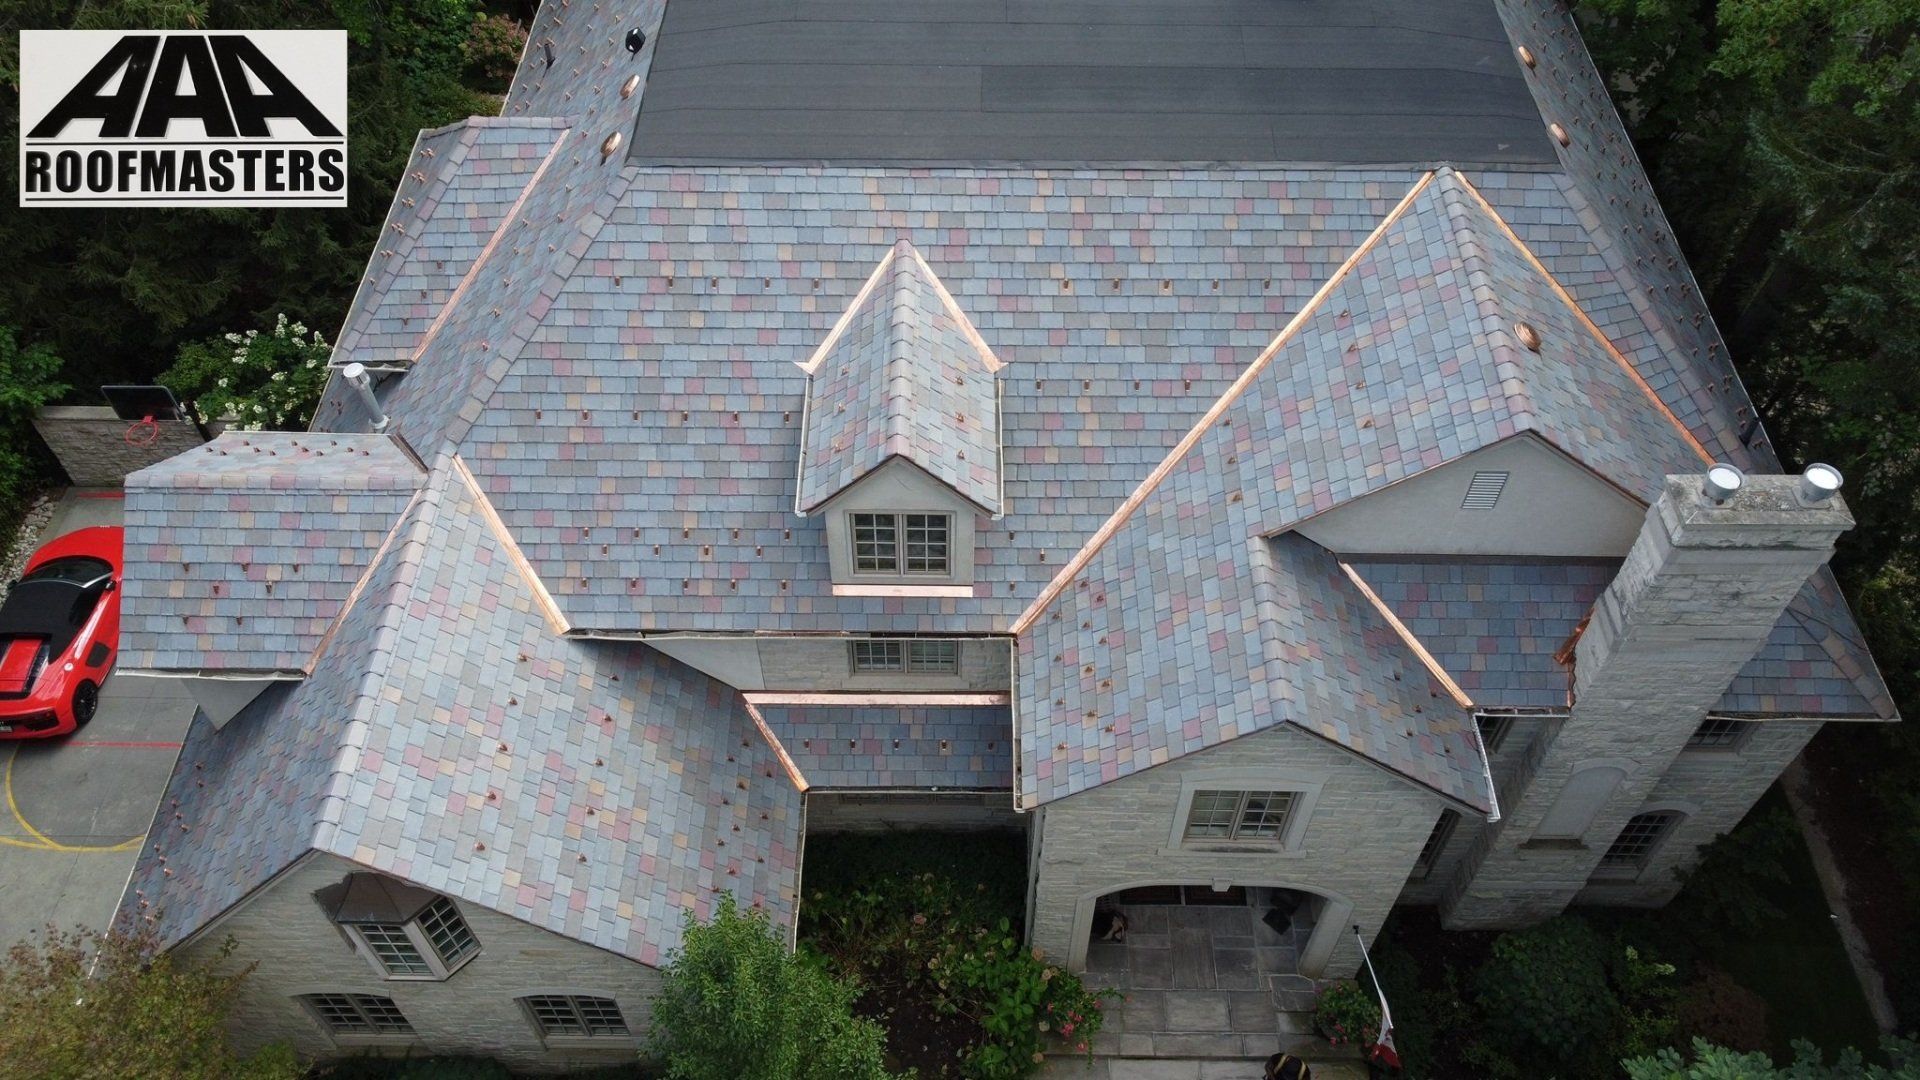 An exterior image of the roof of a house